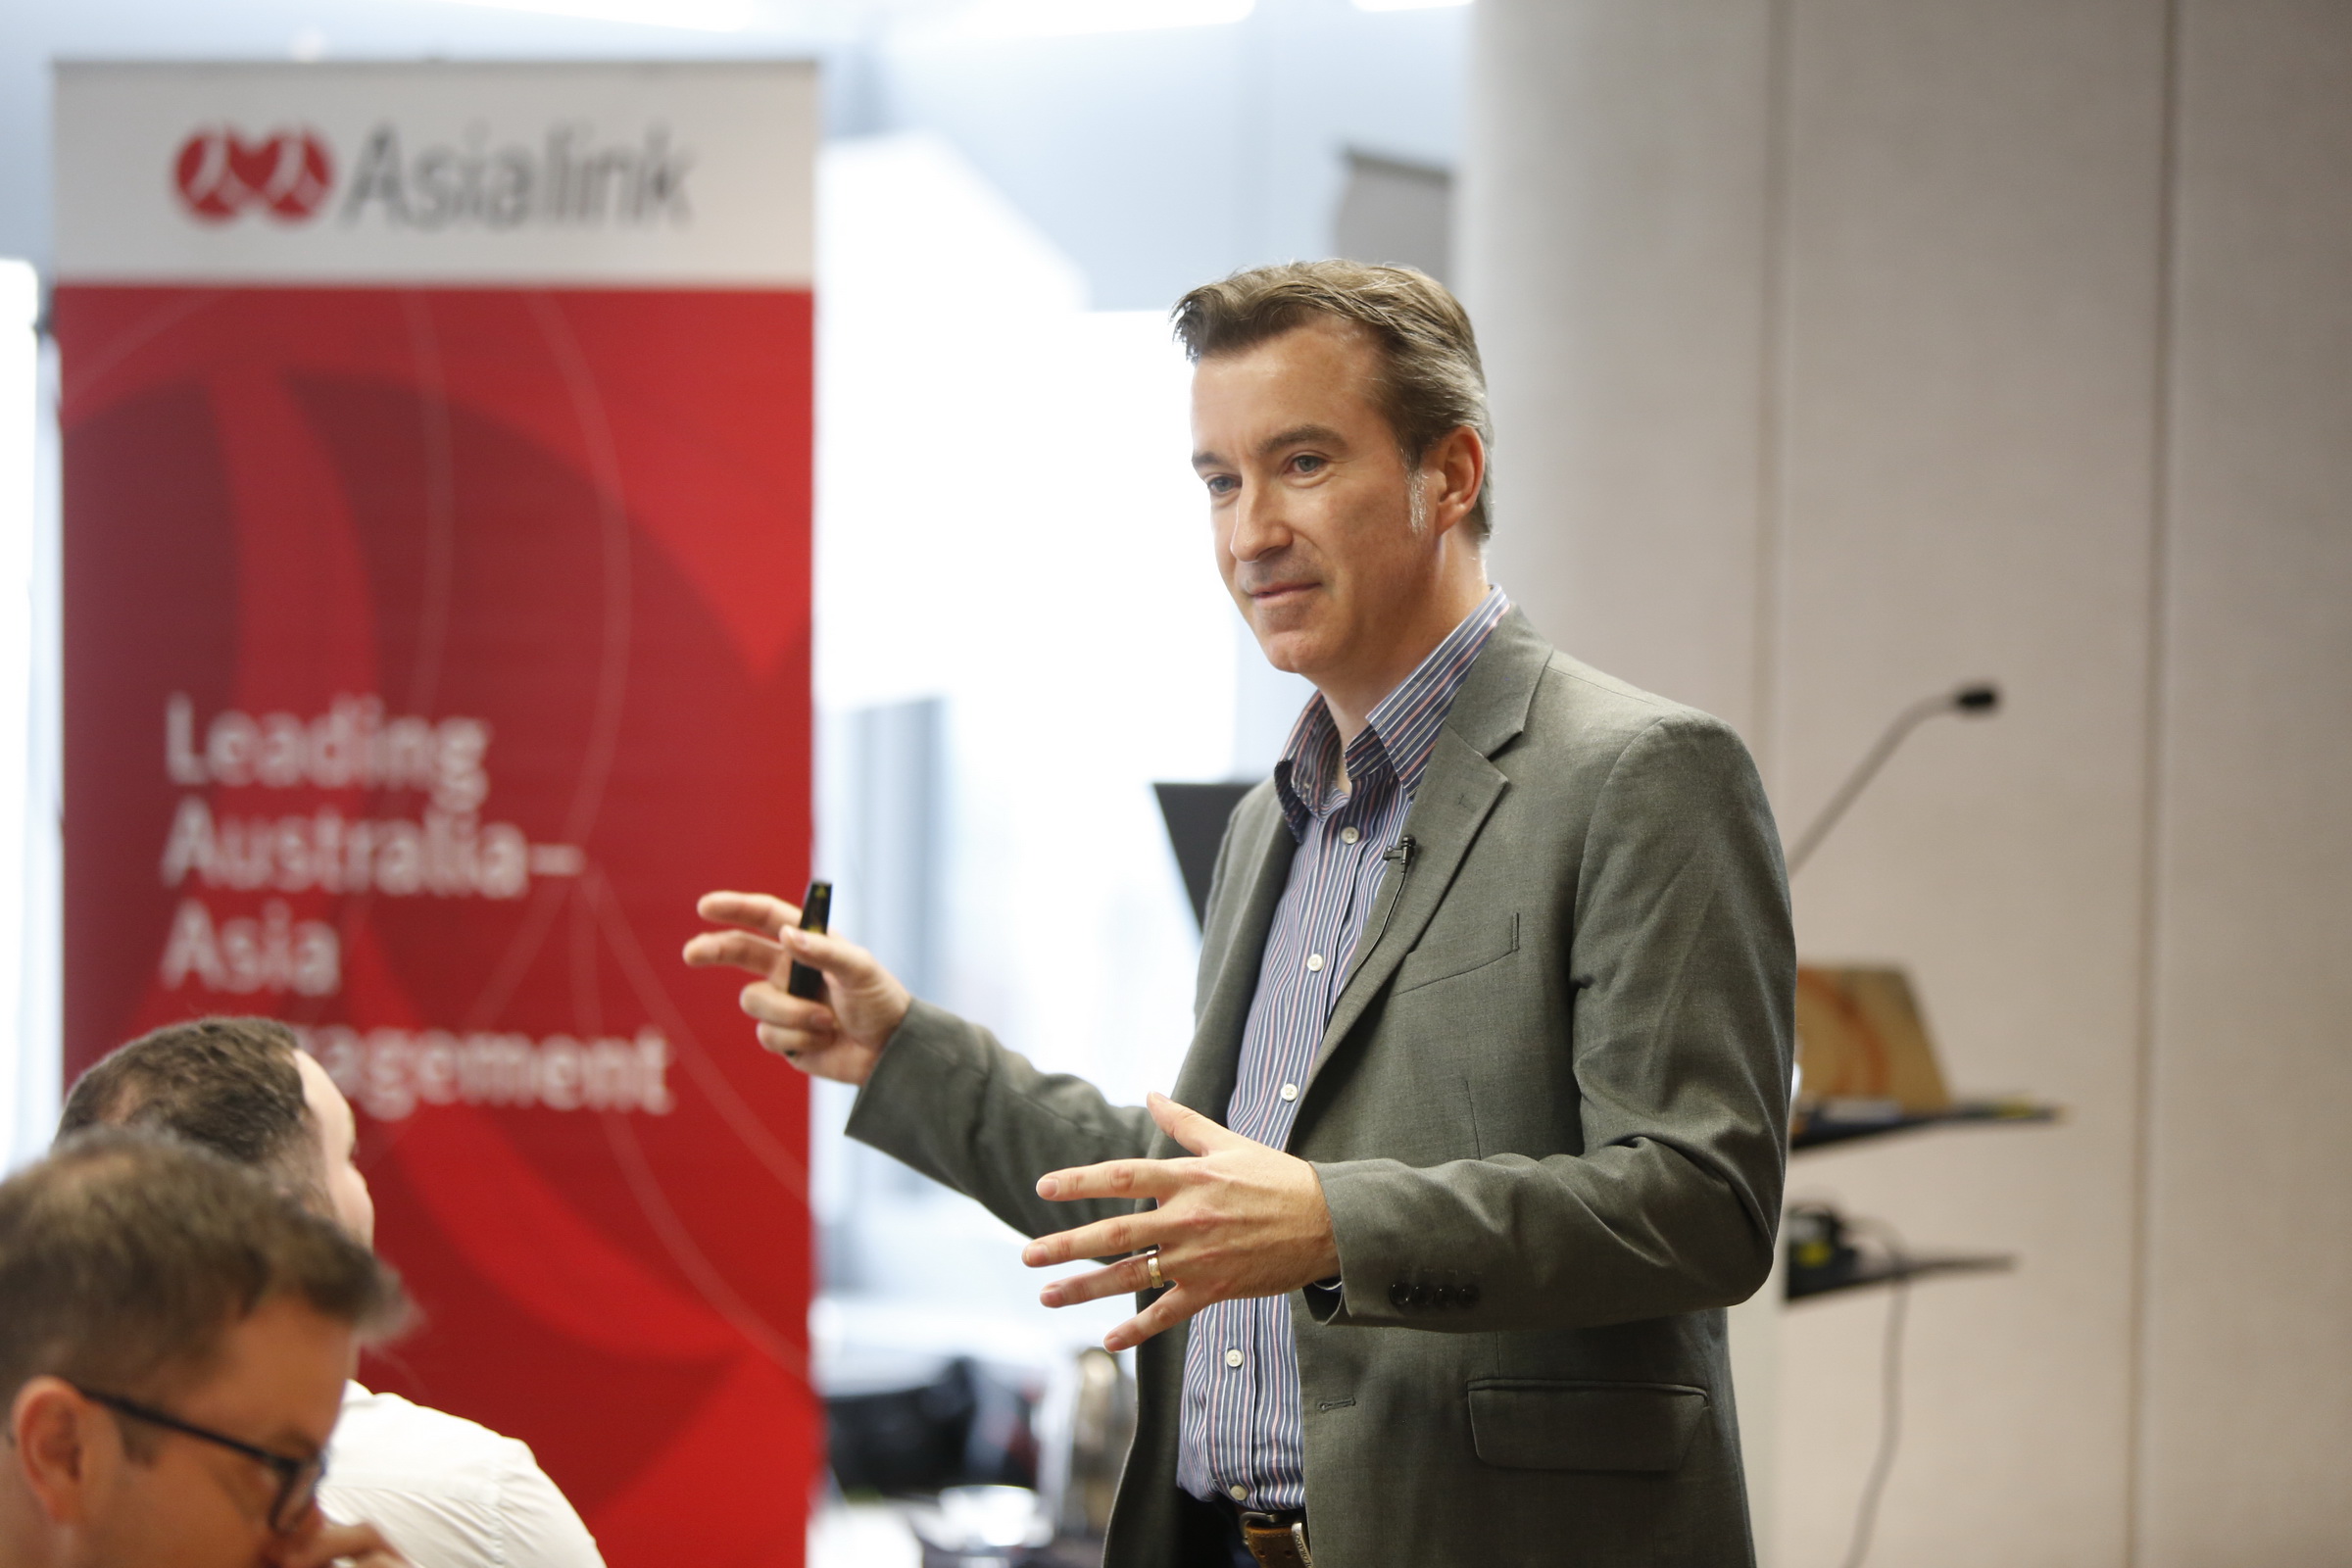 Hamish Curry leads a professional learning session as part of the 2020 Asialink Leaders Program 